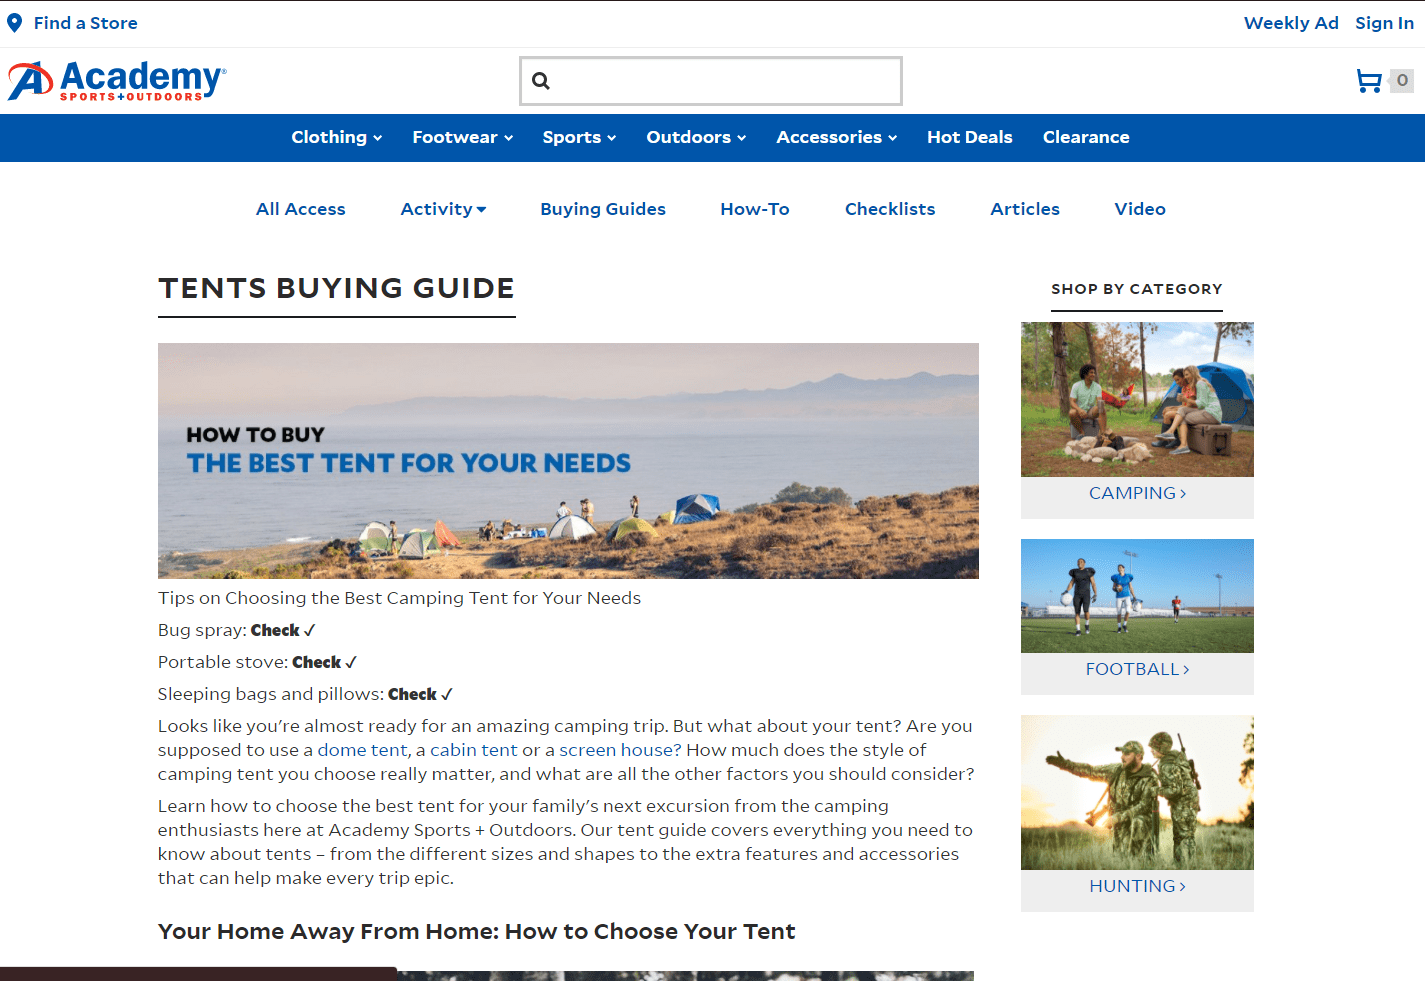 Website Copy for Academy Sports + Outdoors